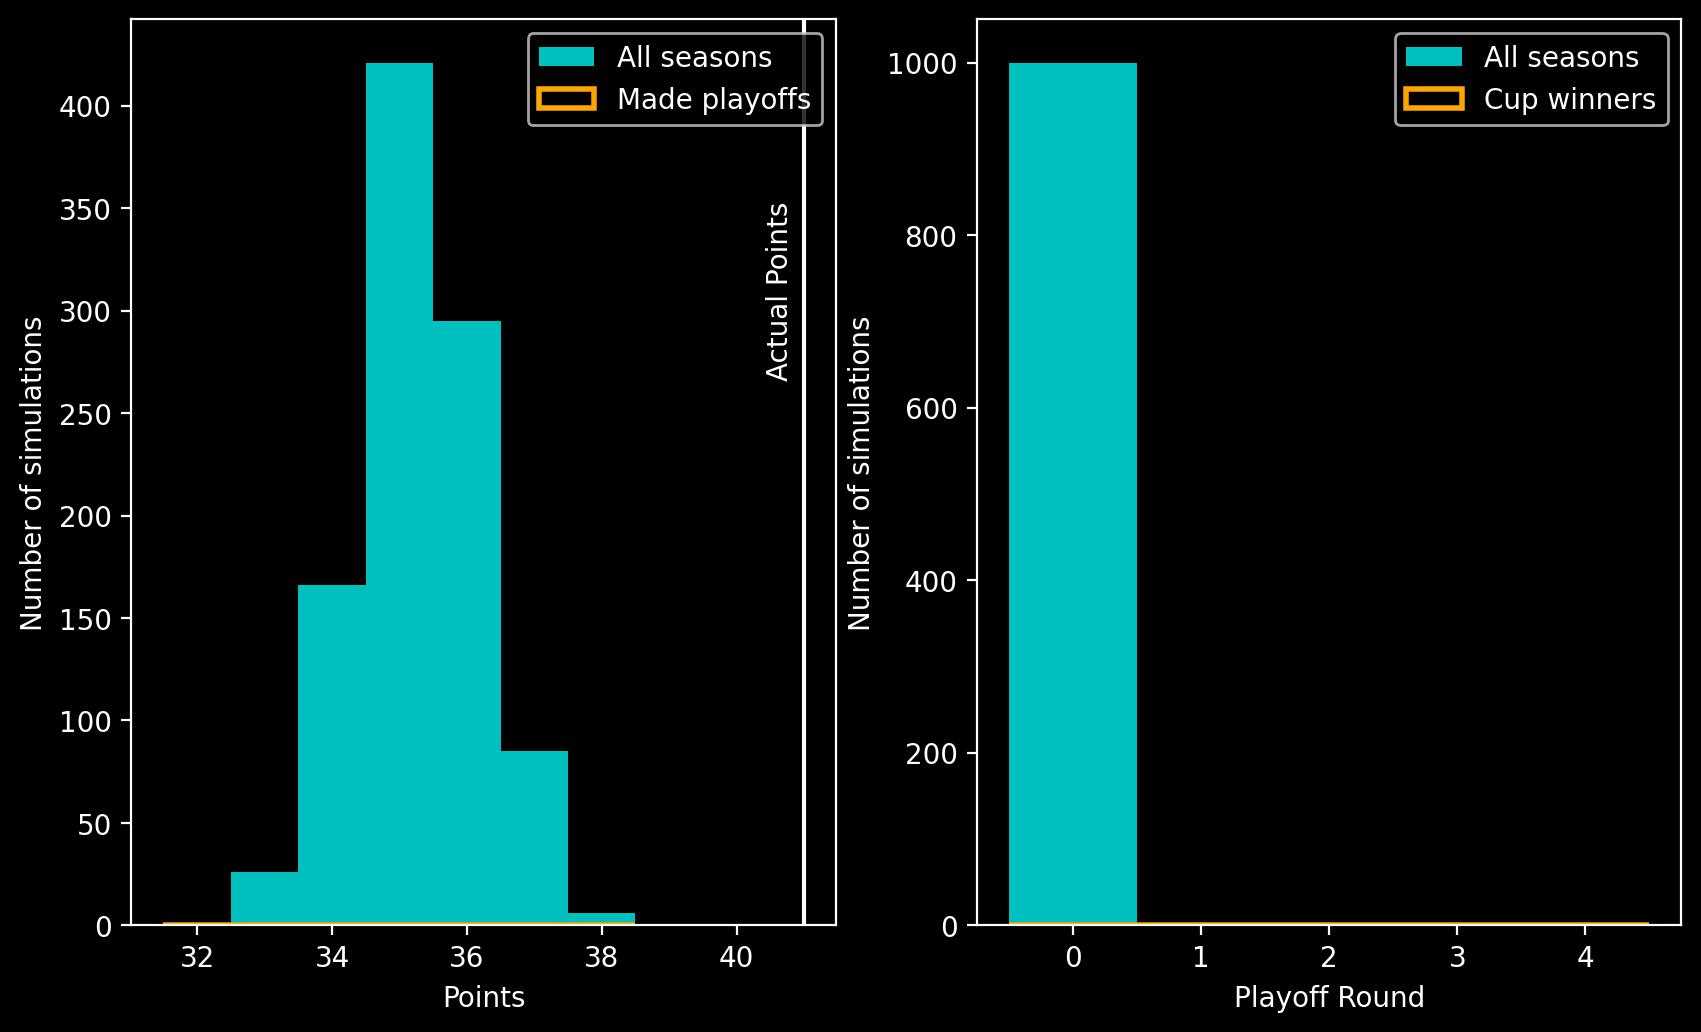 Two panel plot showing histograms. Left panel shows a histogram of points on the x-axis against number of simulations on the y-axis, the peak is at 35 points. Right panel shows playoff round on the x-axis against number of simulations on the y-axis. The largest bar is at playoff round 0.